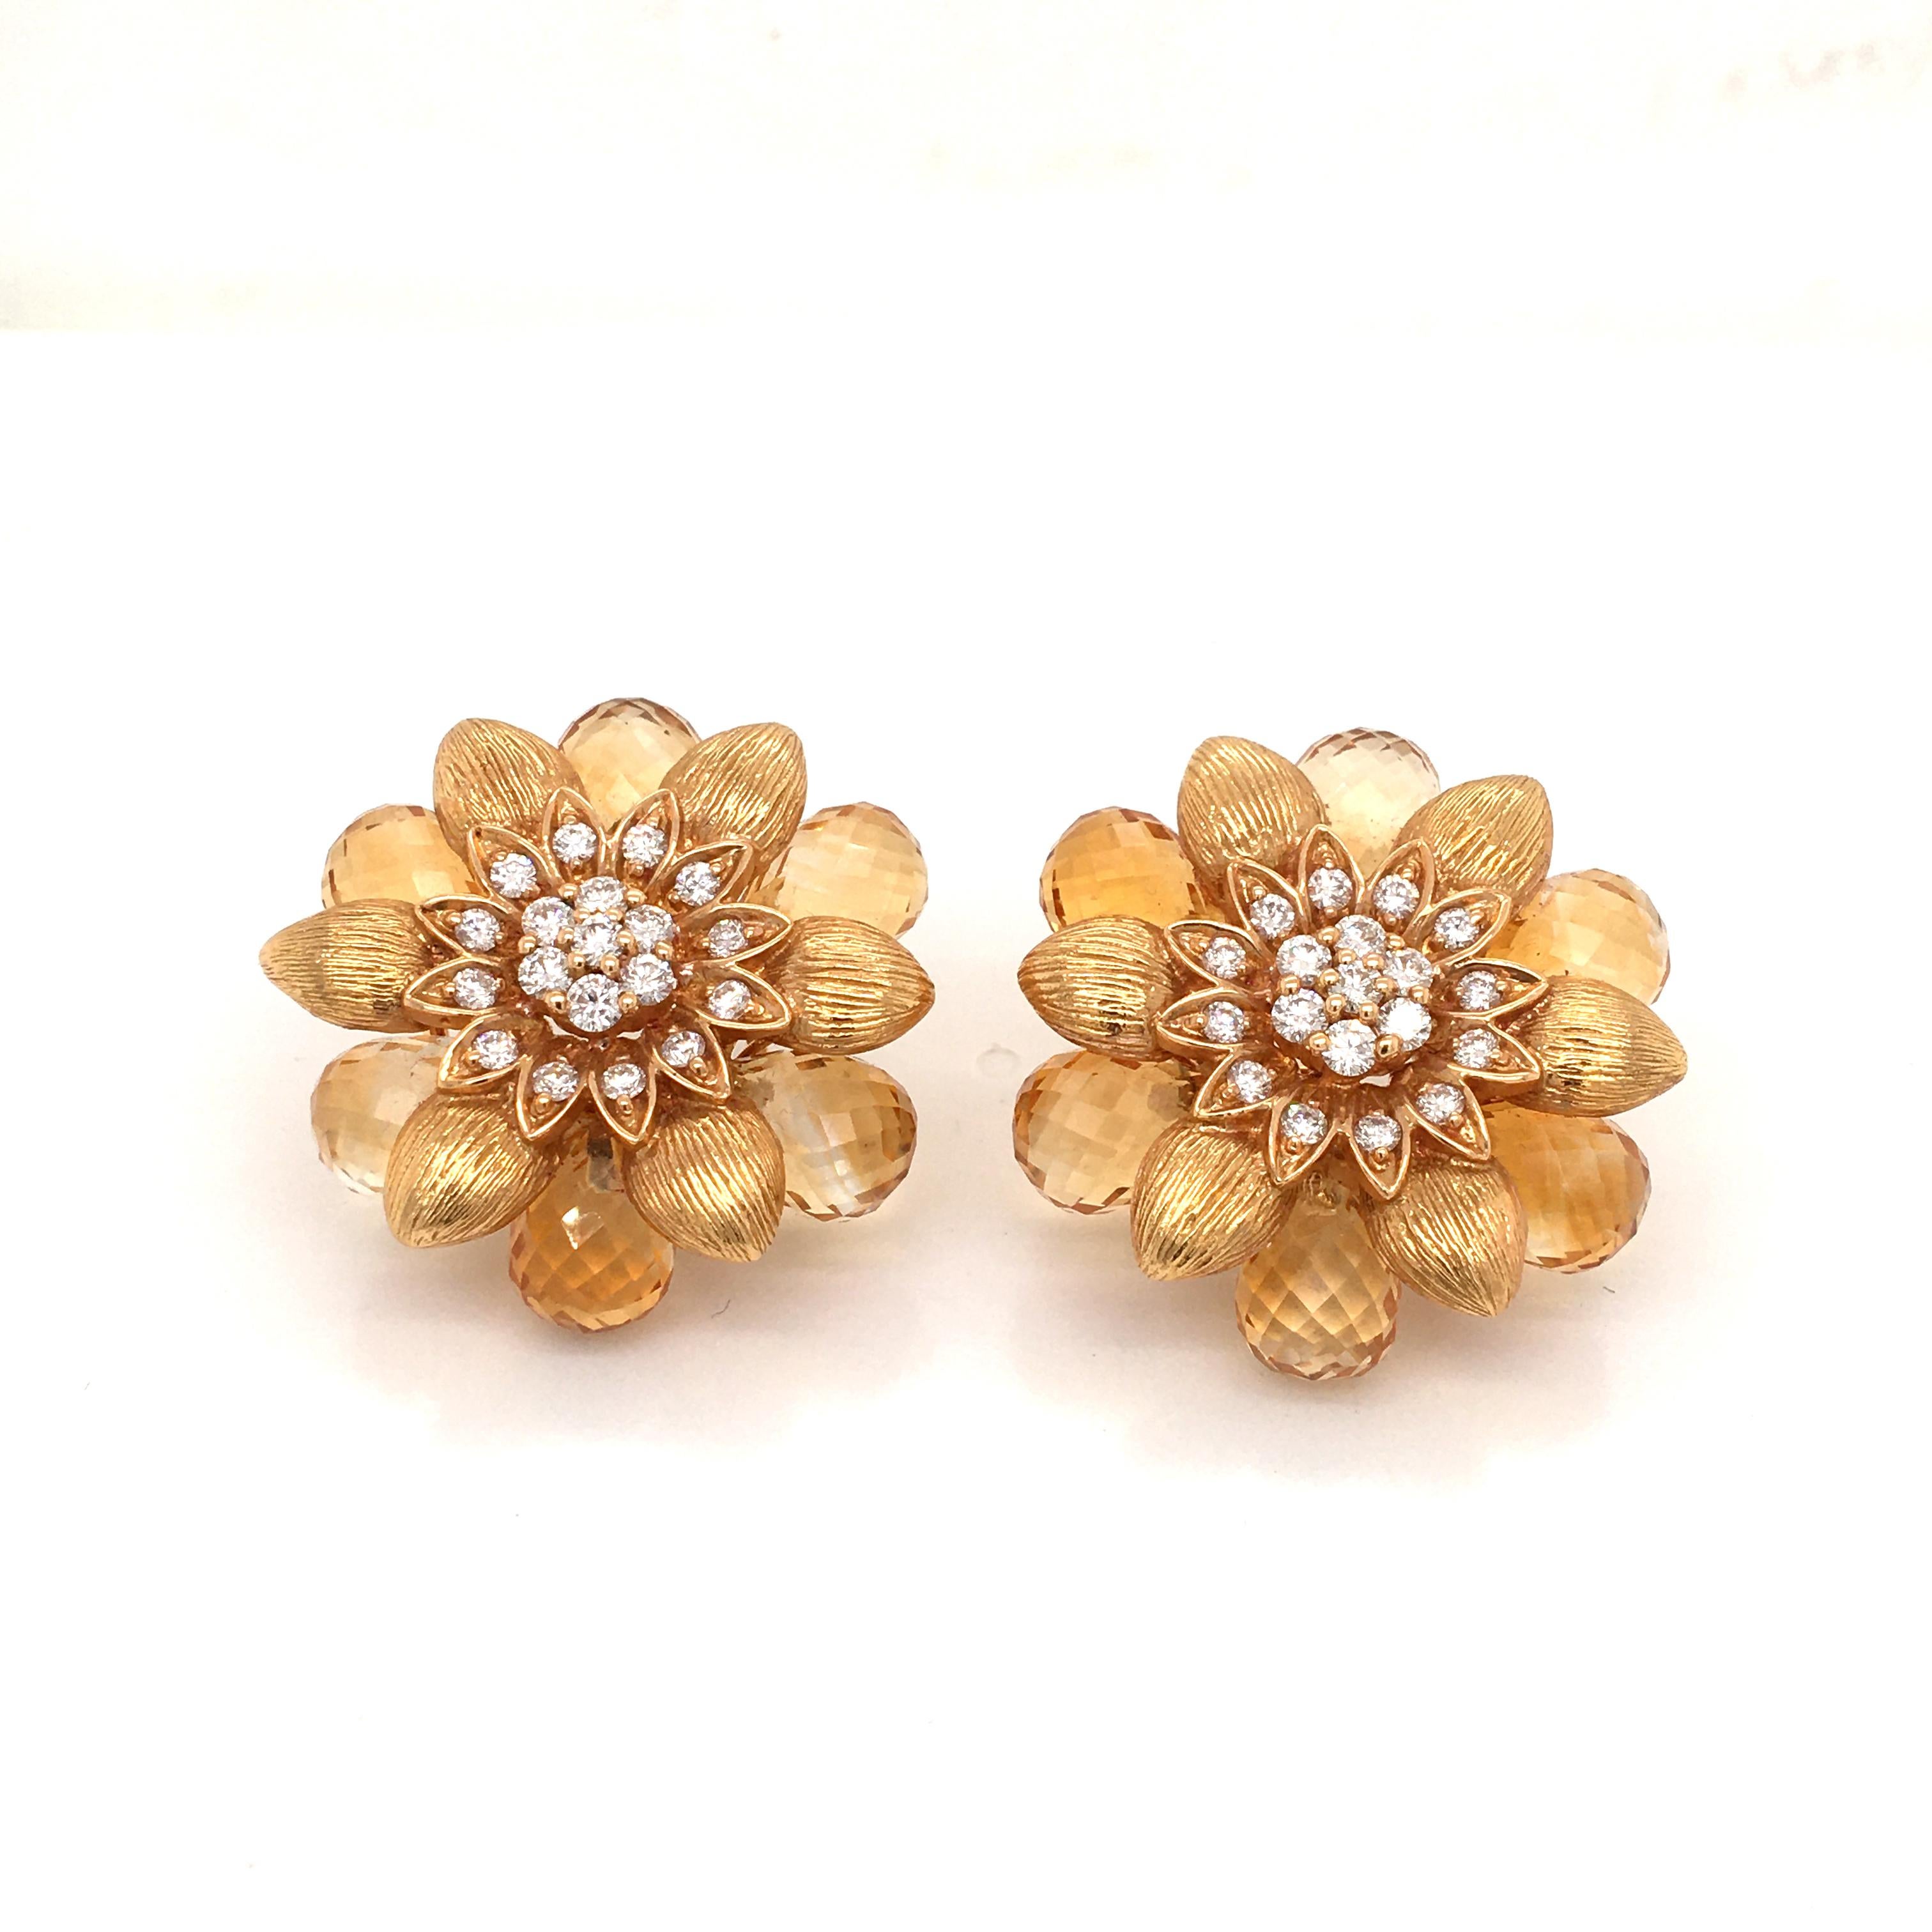 18 Karat Yellow Gold Citrine Flower Design Pair of Earrings Made in Italy For Sale 2